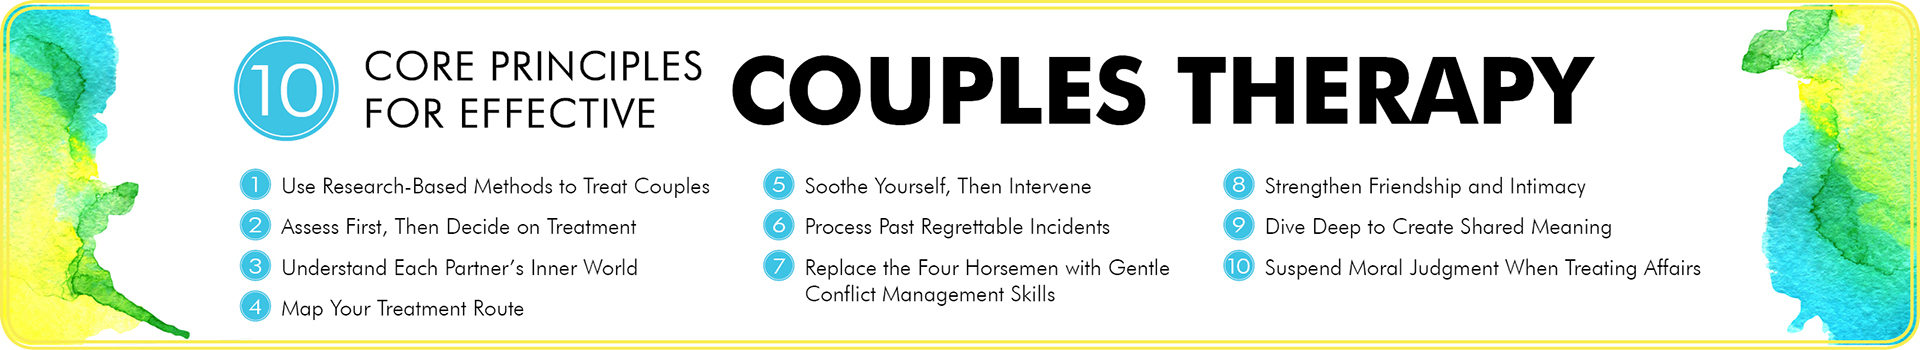 Drs. John and Julie Gottman on the 10 Core Principles for Effective Couples Therapy